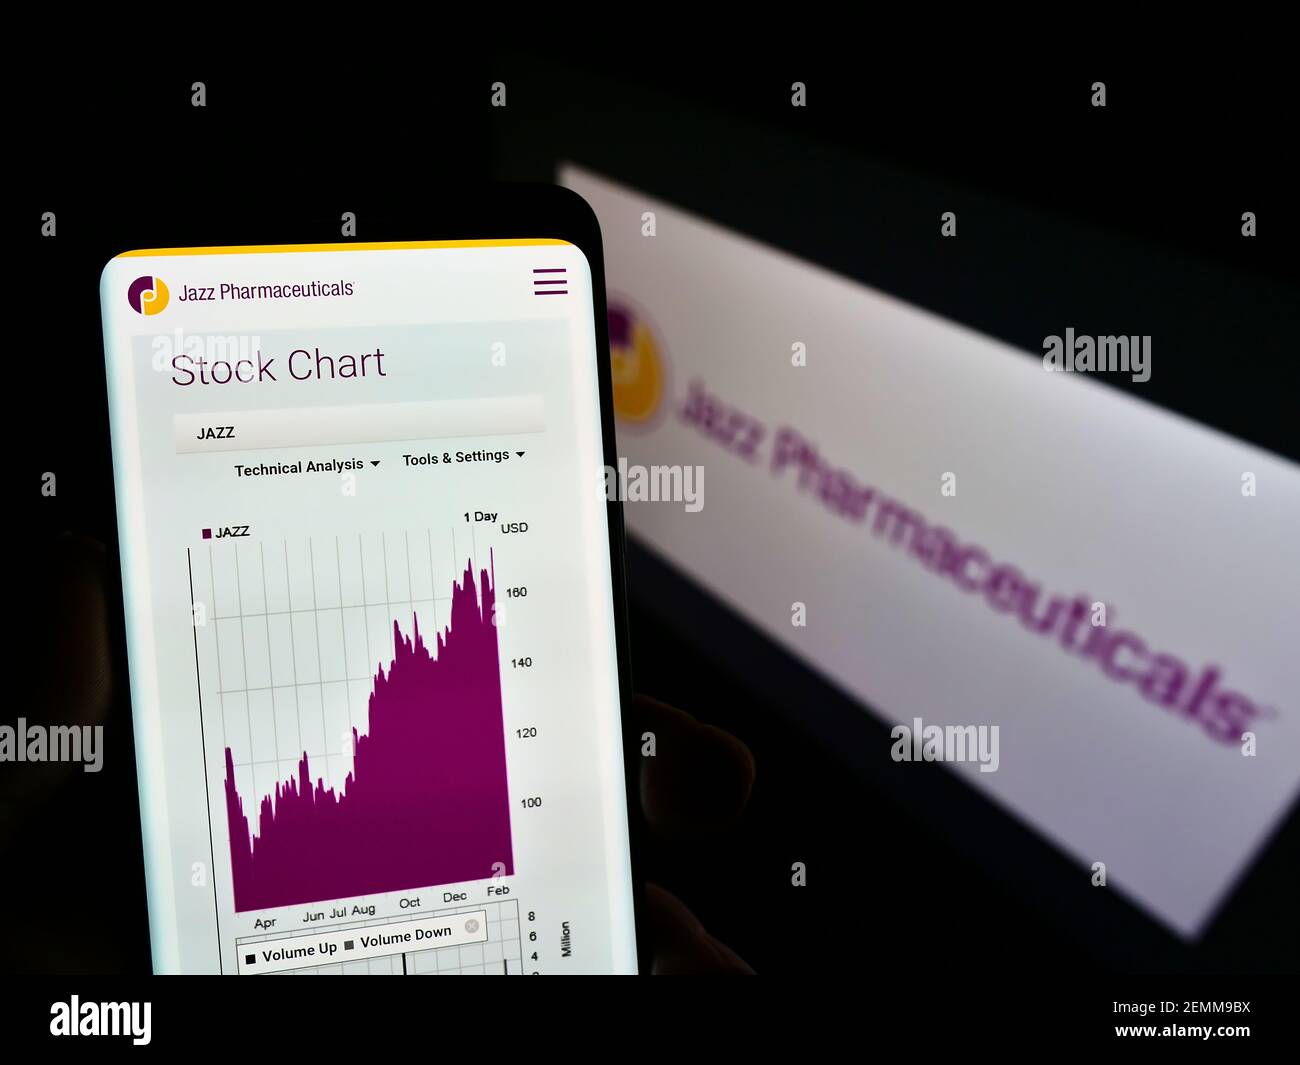 Person holding cellphone with website and stock price chart of company Jazz Pharmaceuticals on screen with logo. Focus on center of phone display. Stock Photo